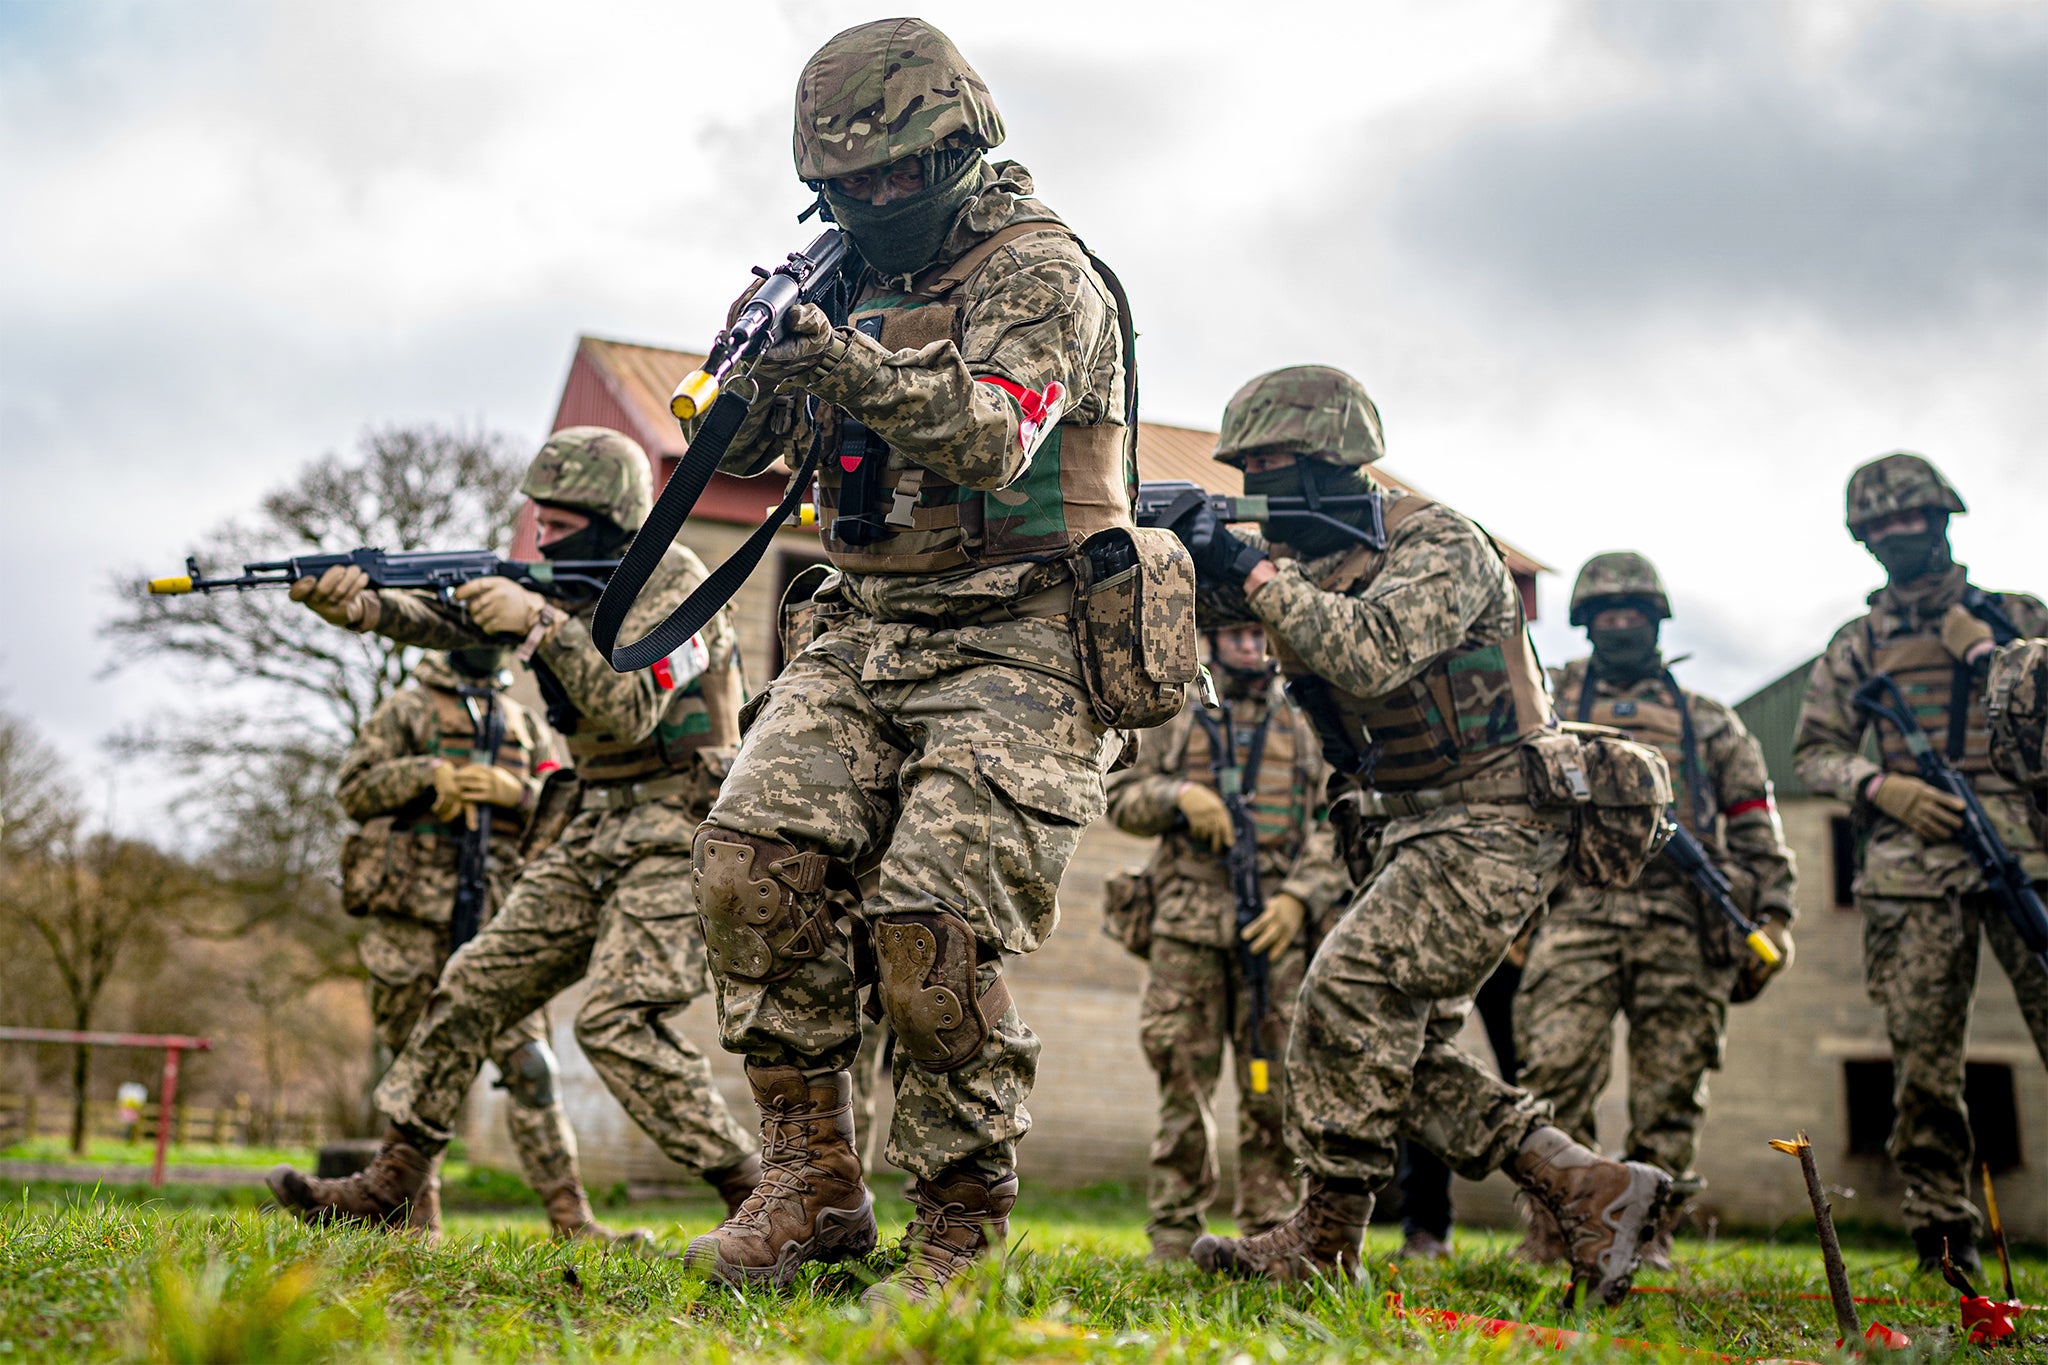 Standard training takes 12-18 weeks – Interflex recruits learn to fight in a fraction of the time